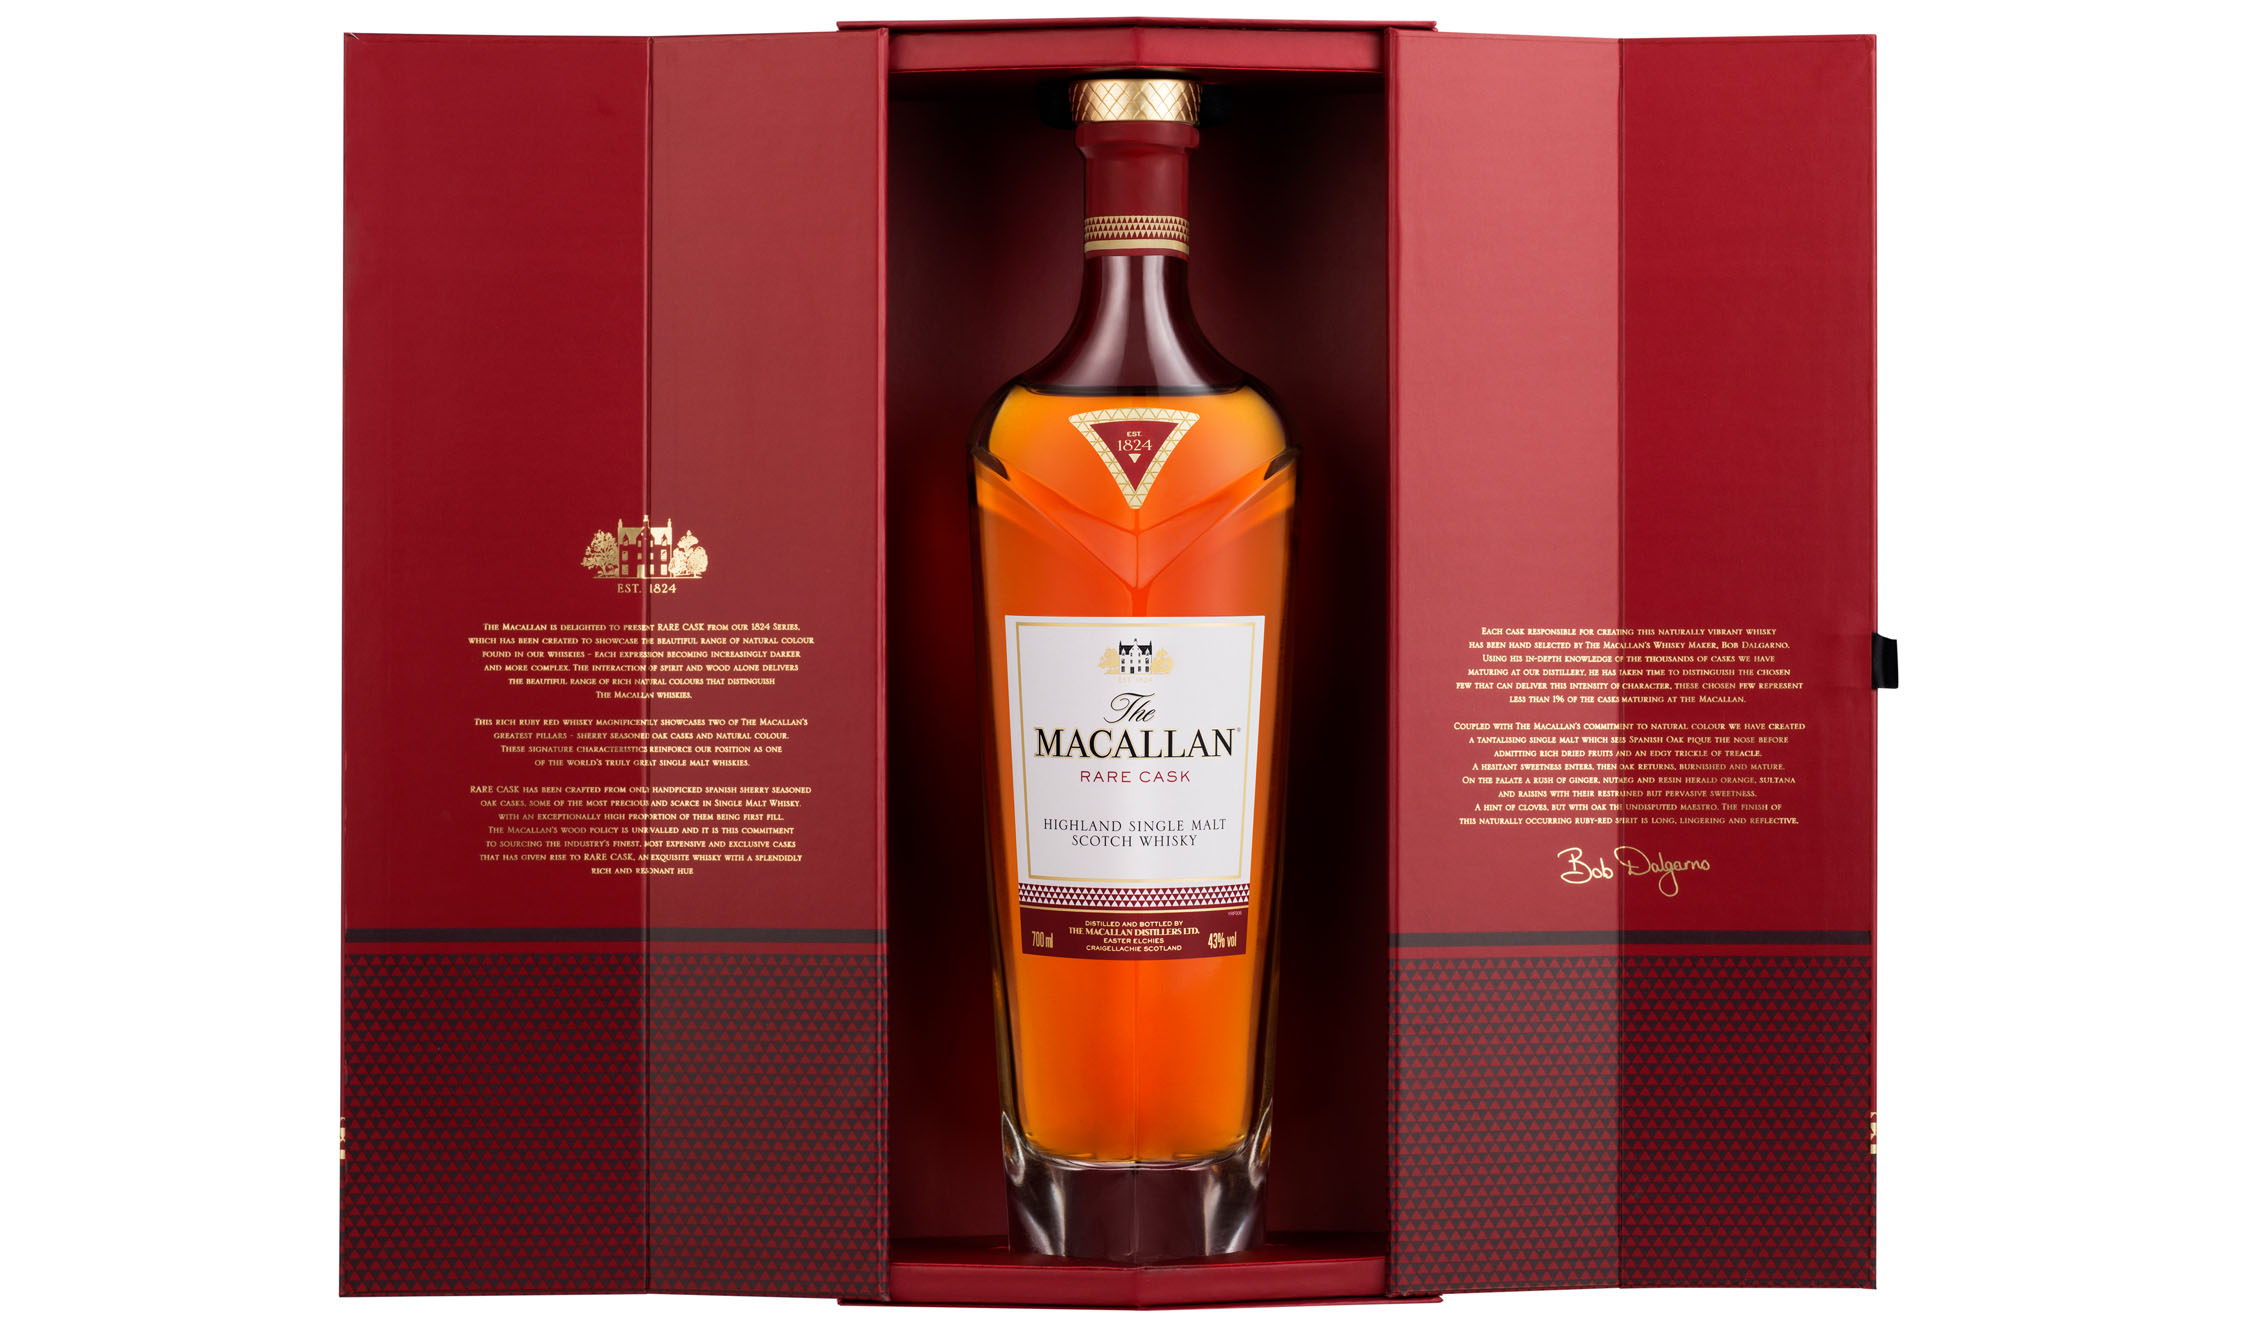 The Macallan Makes A Big No Age Statement With Rare Cask Whisky Bloomberg